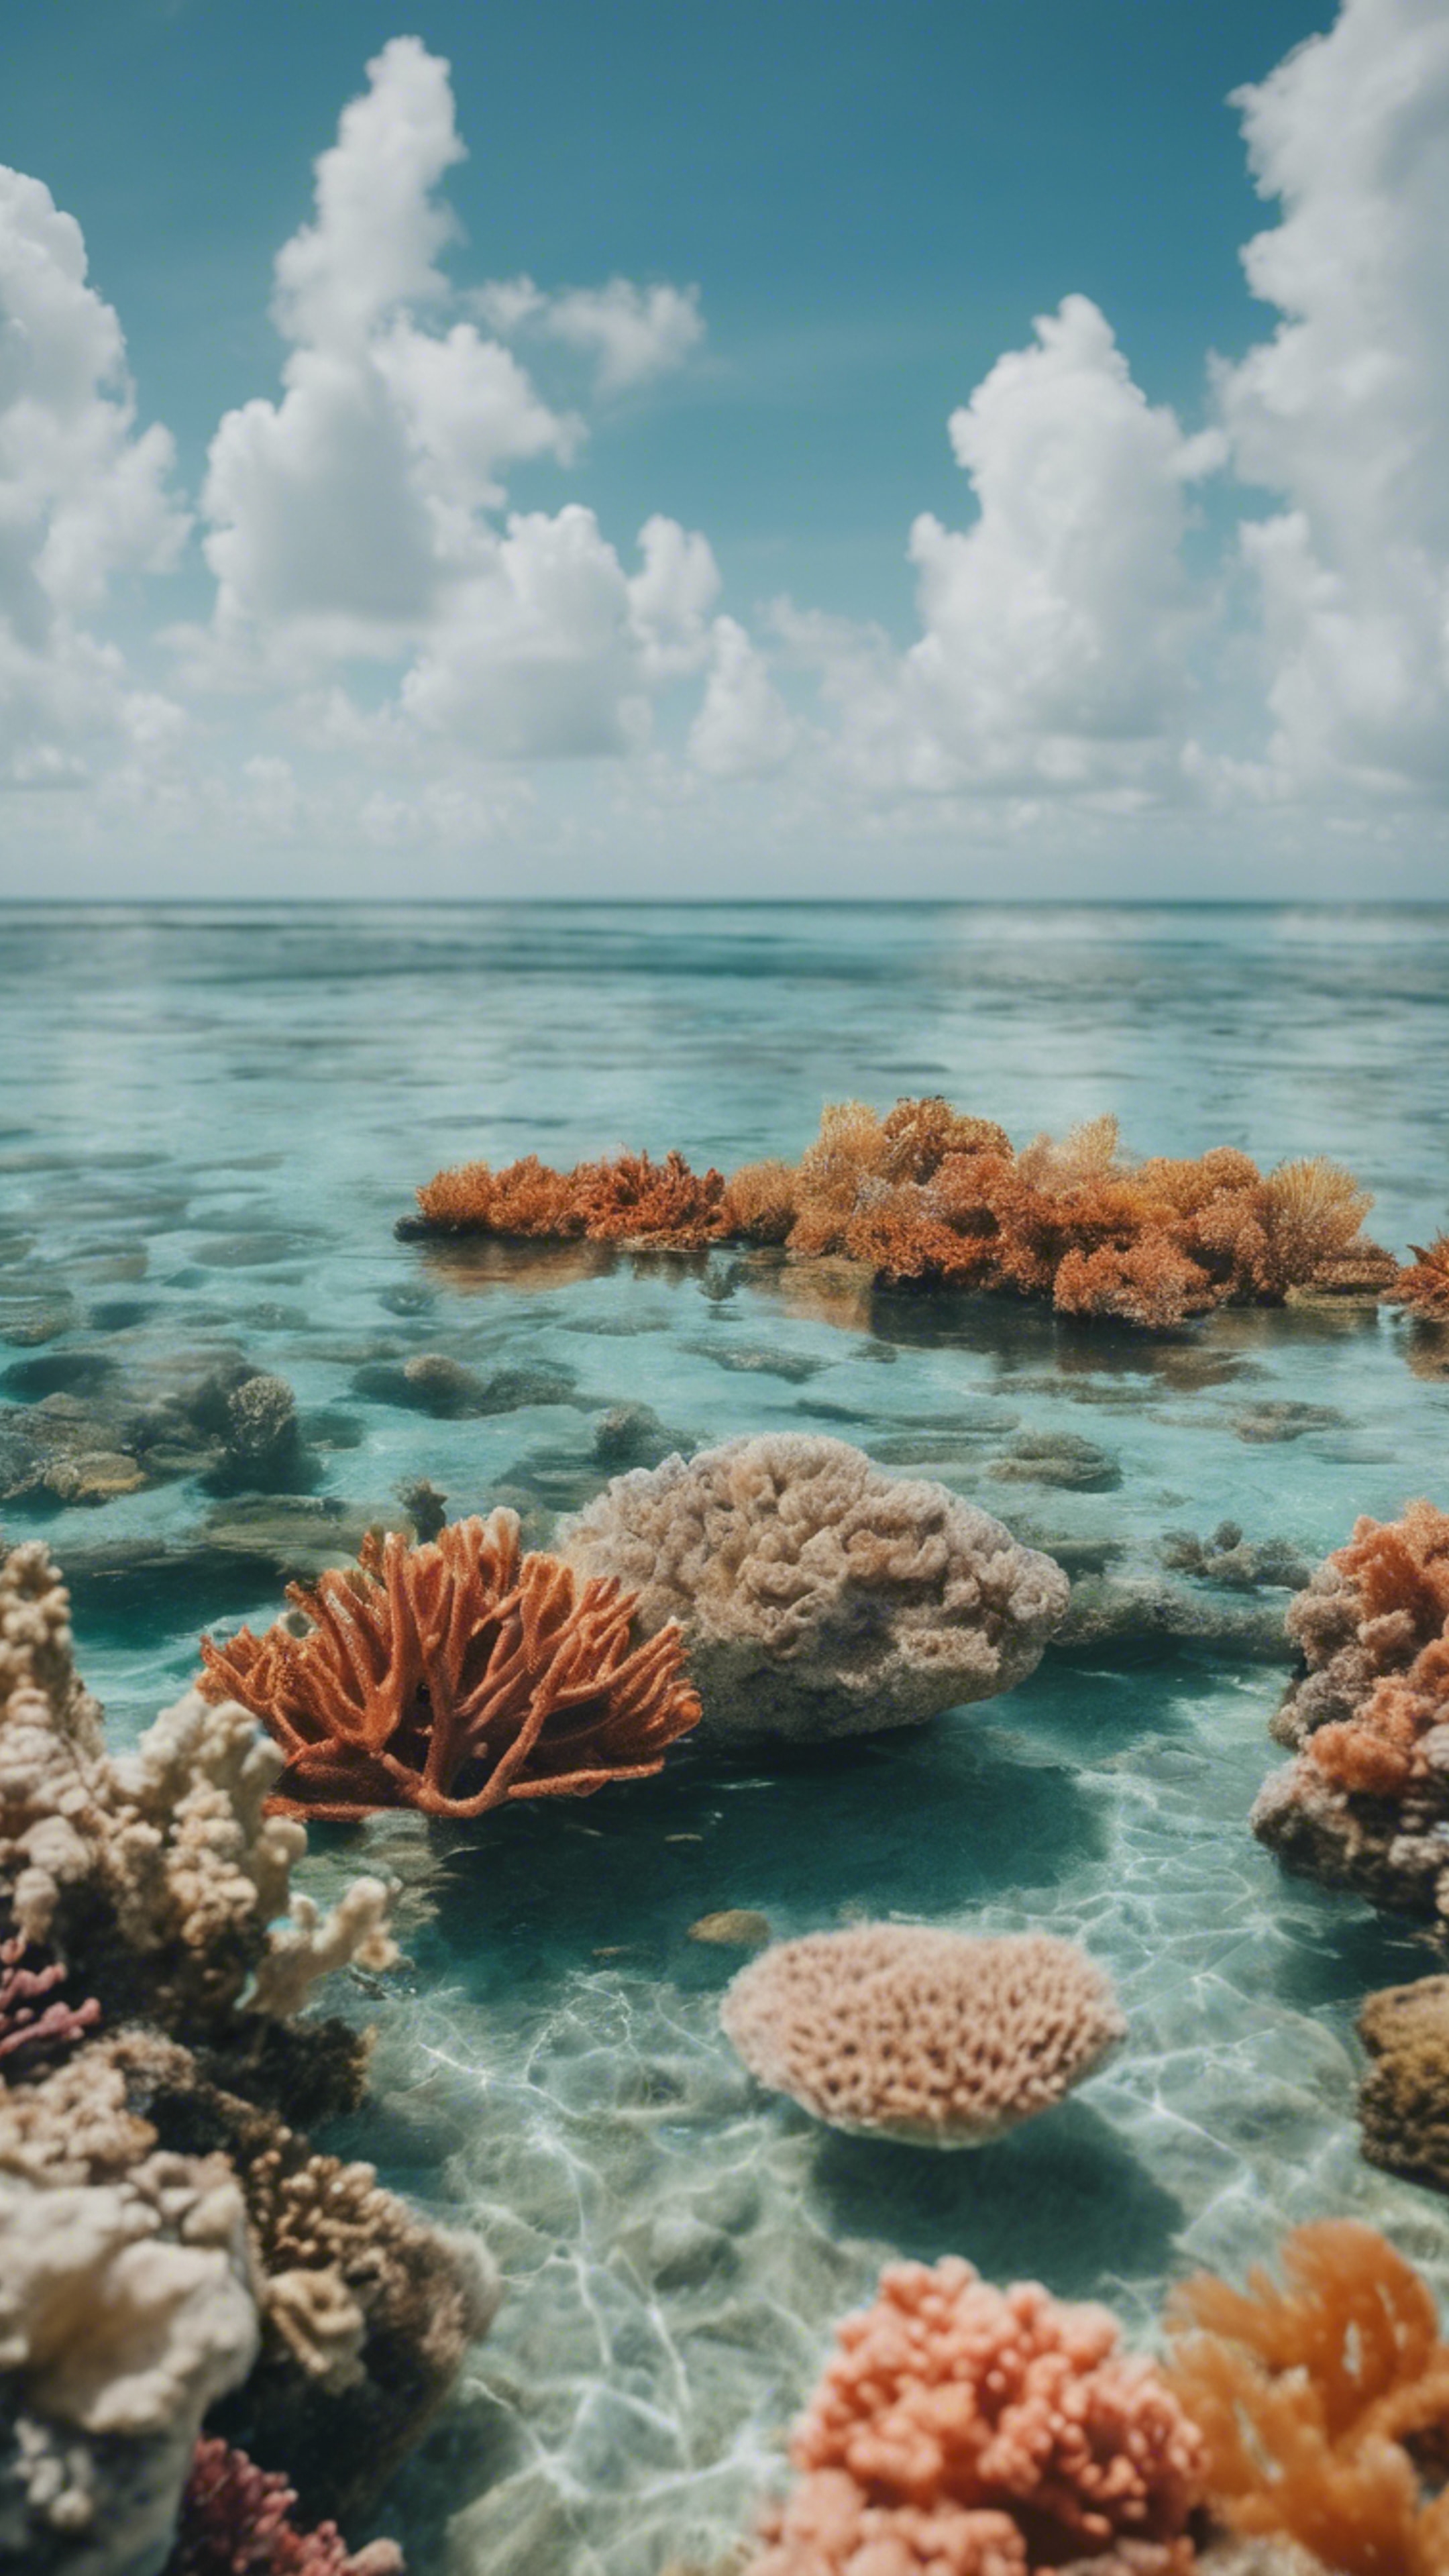 A serene view of the Florida Keys with crystal clear water and a colorful coral reef visible underwater. Tapeta[53a9c37260d942df83c4]